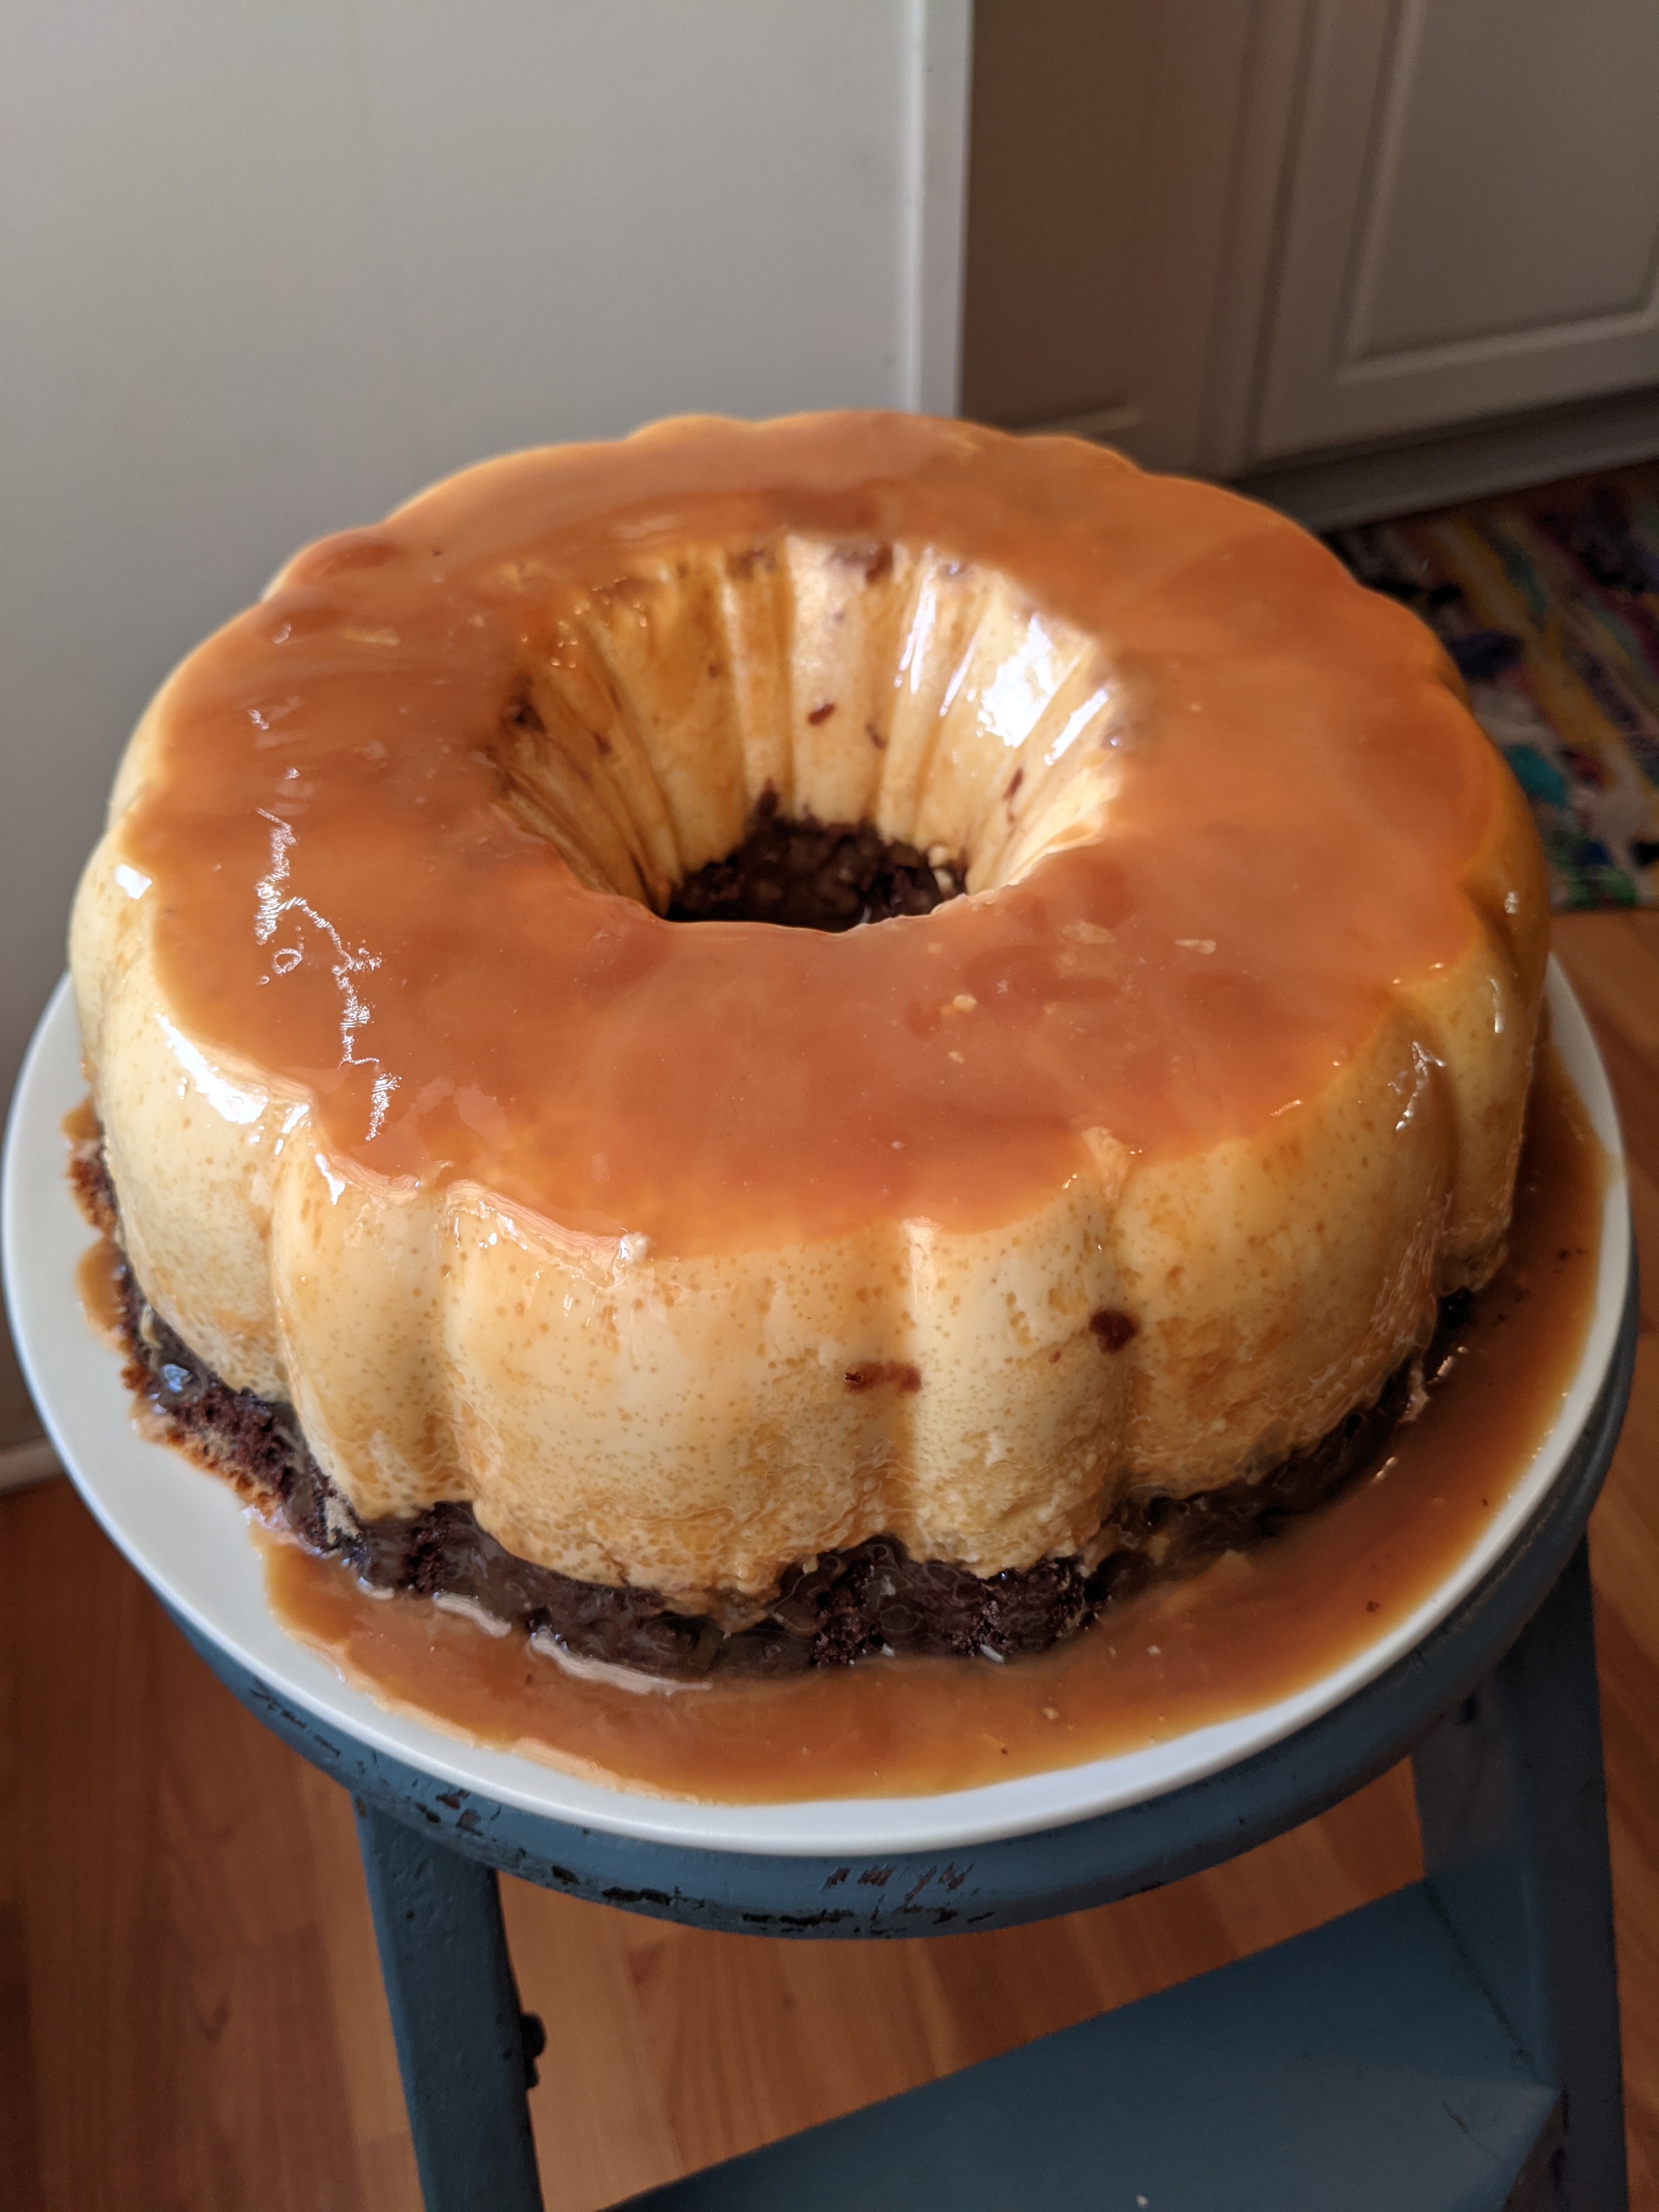 A flan cake with chocolate base layer